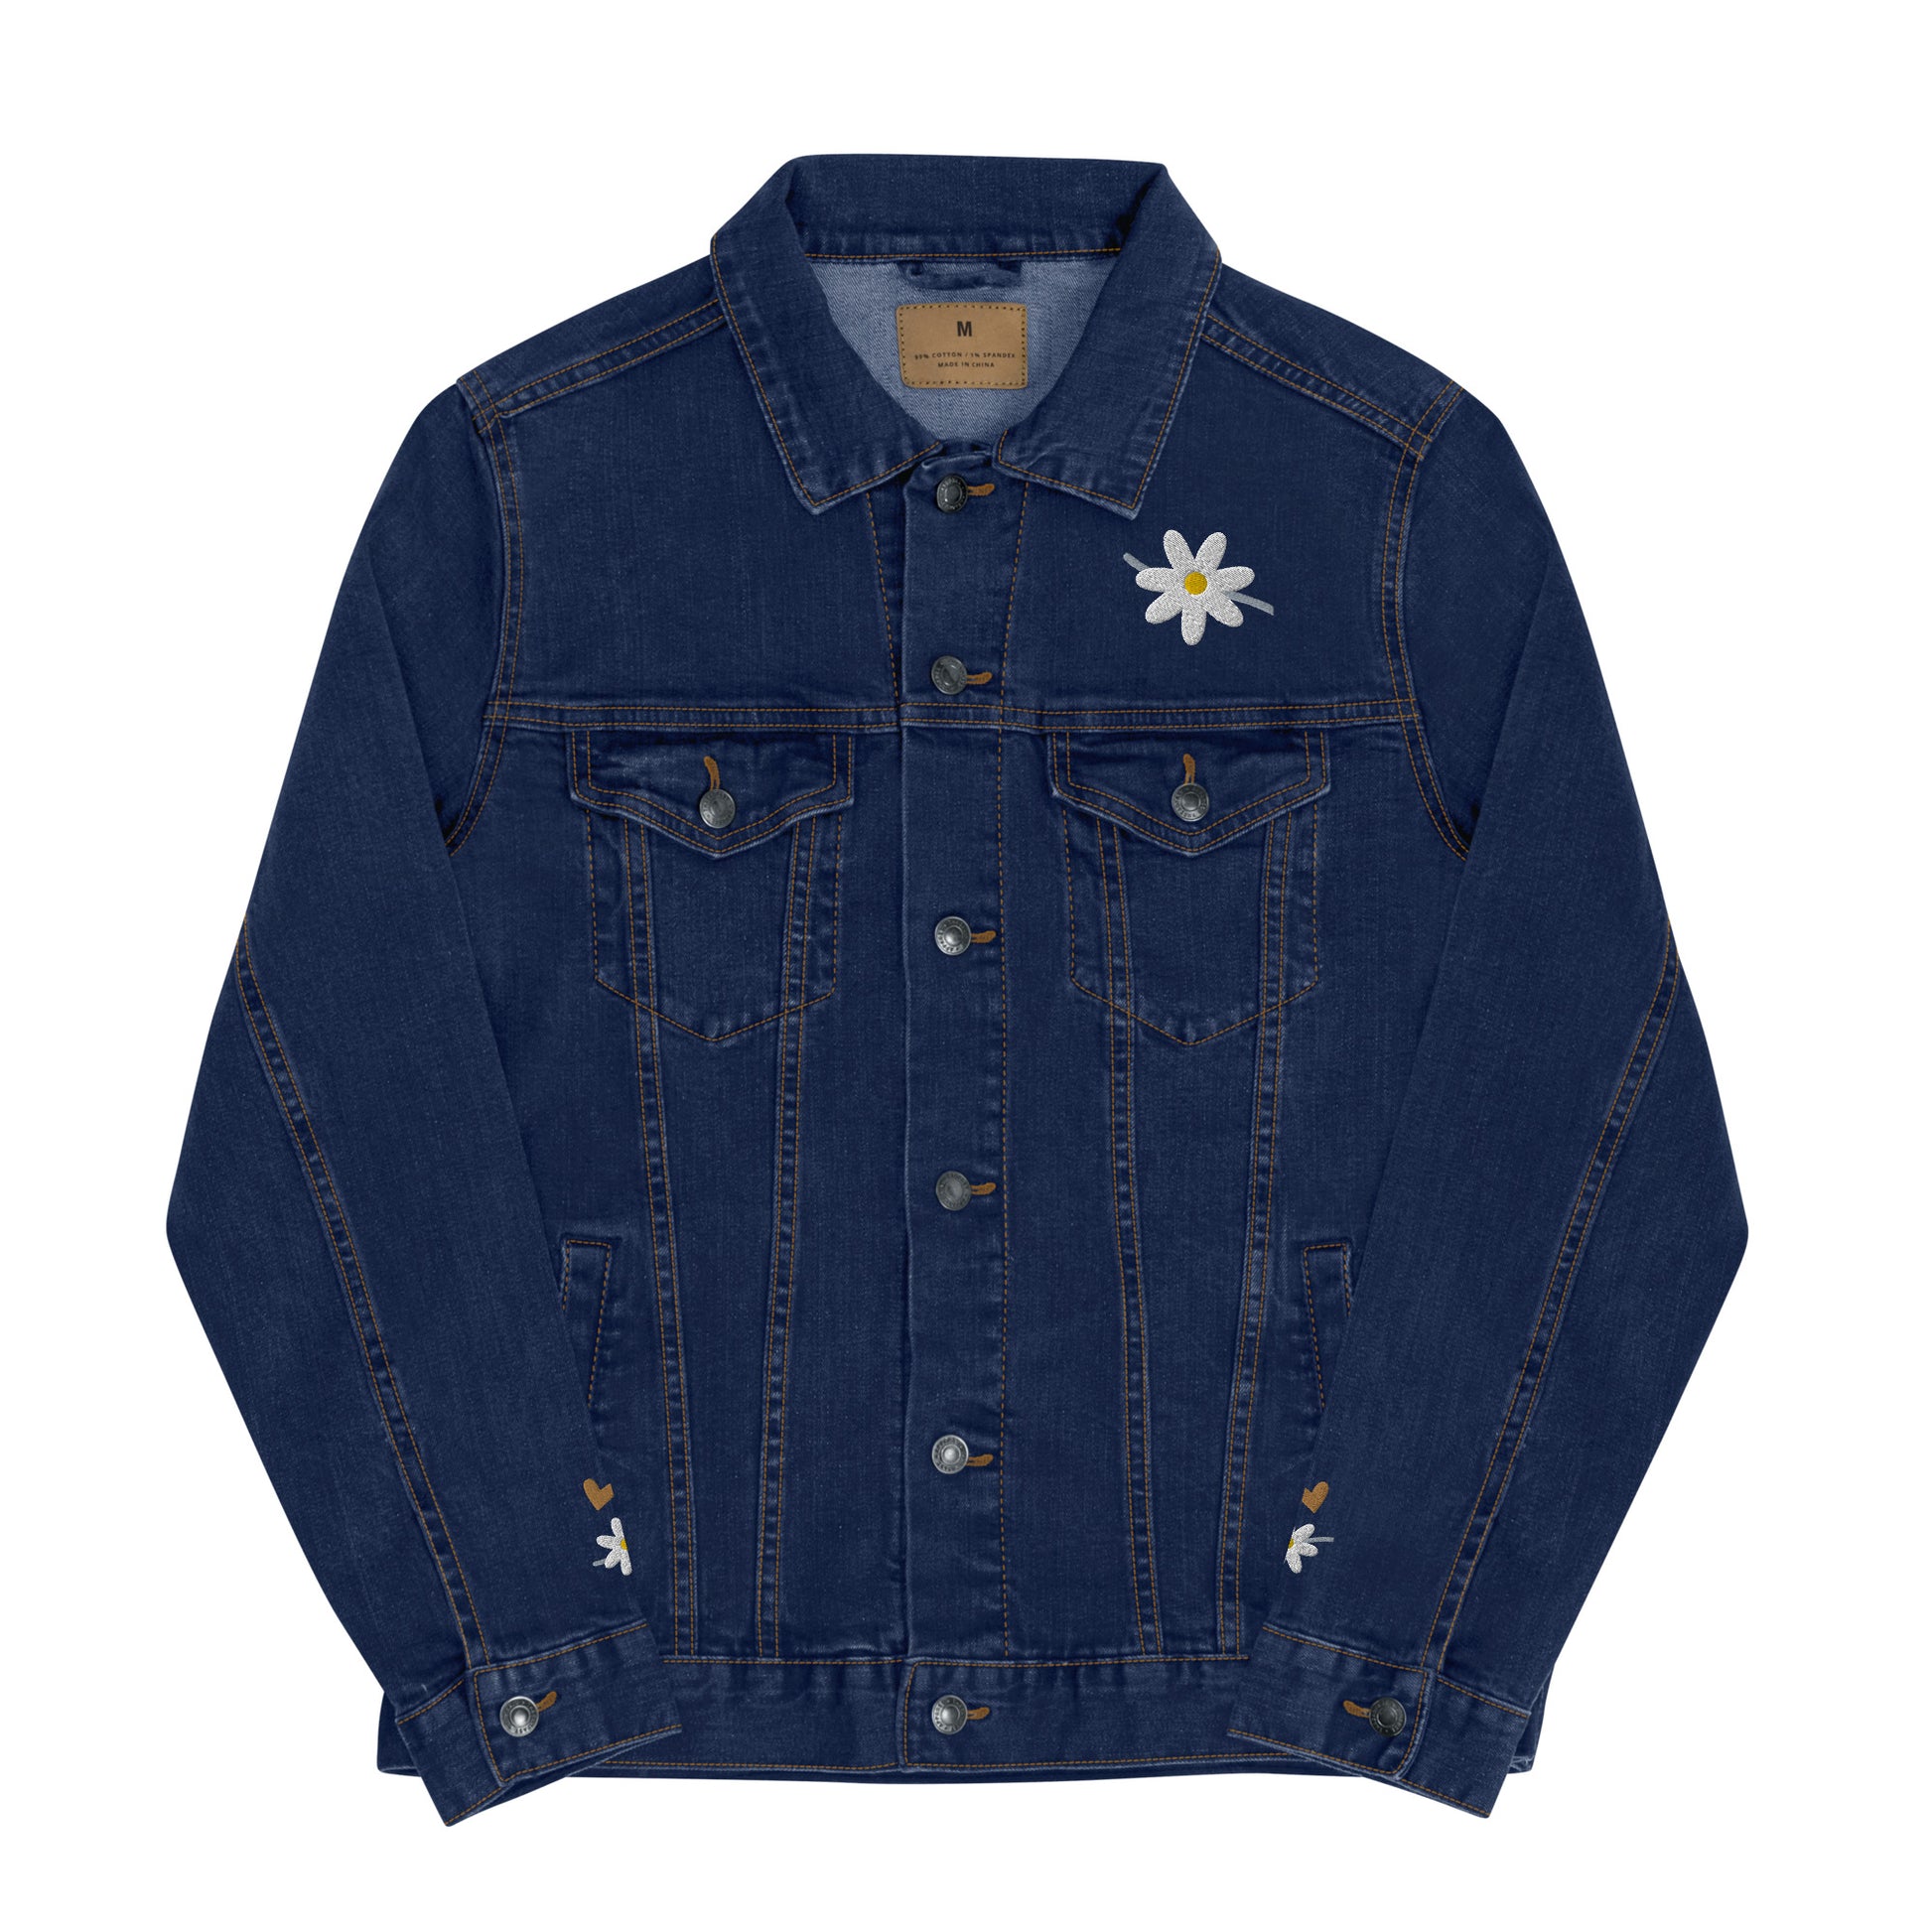 Front view of blue denim jean jacket with white daisy embroidered on the front left lapel area and partial view of daisies embroidered on wrist area above cuffs.